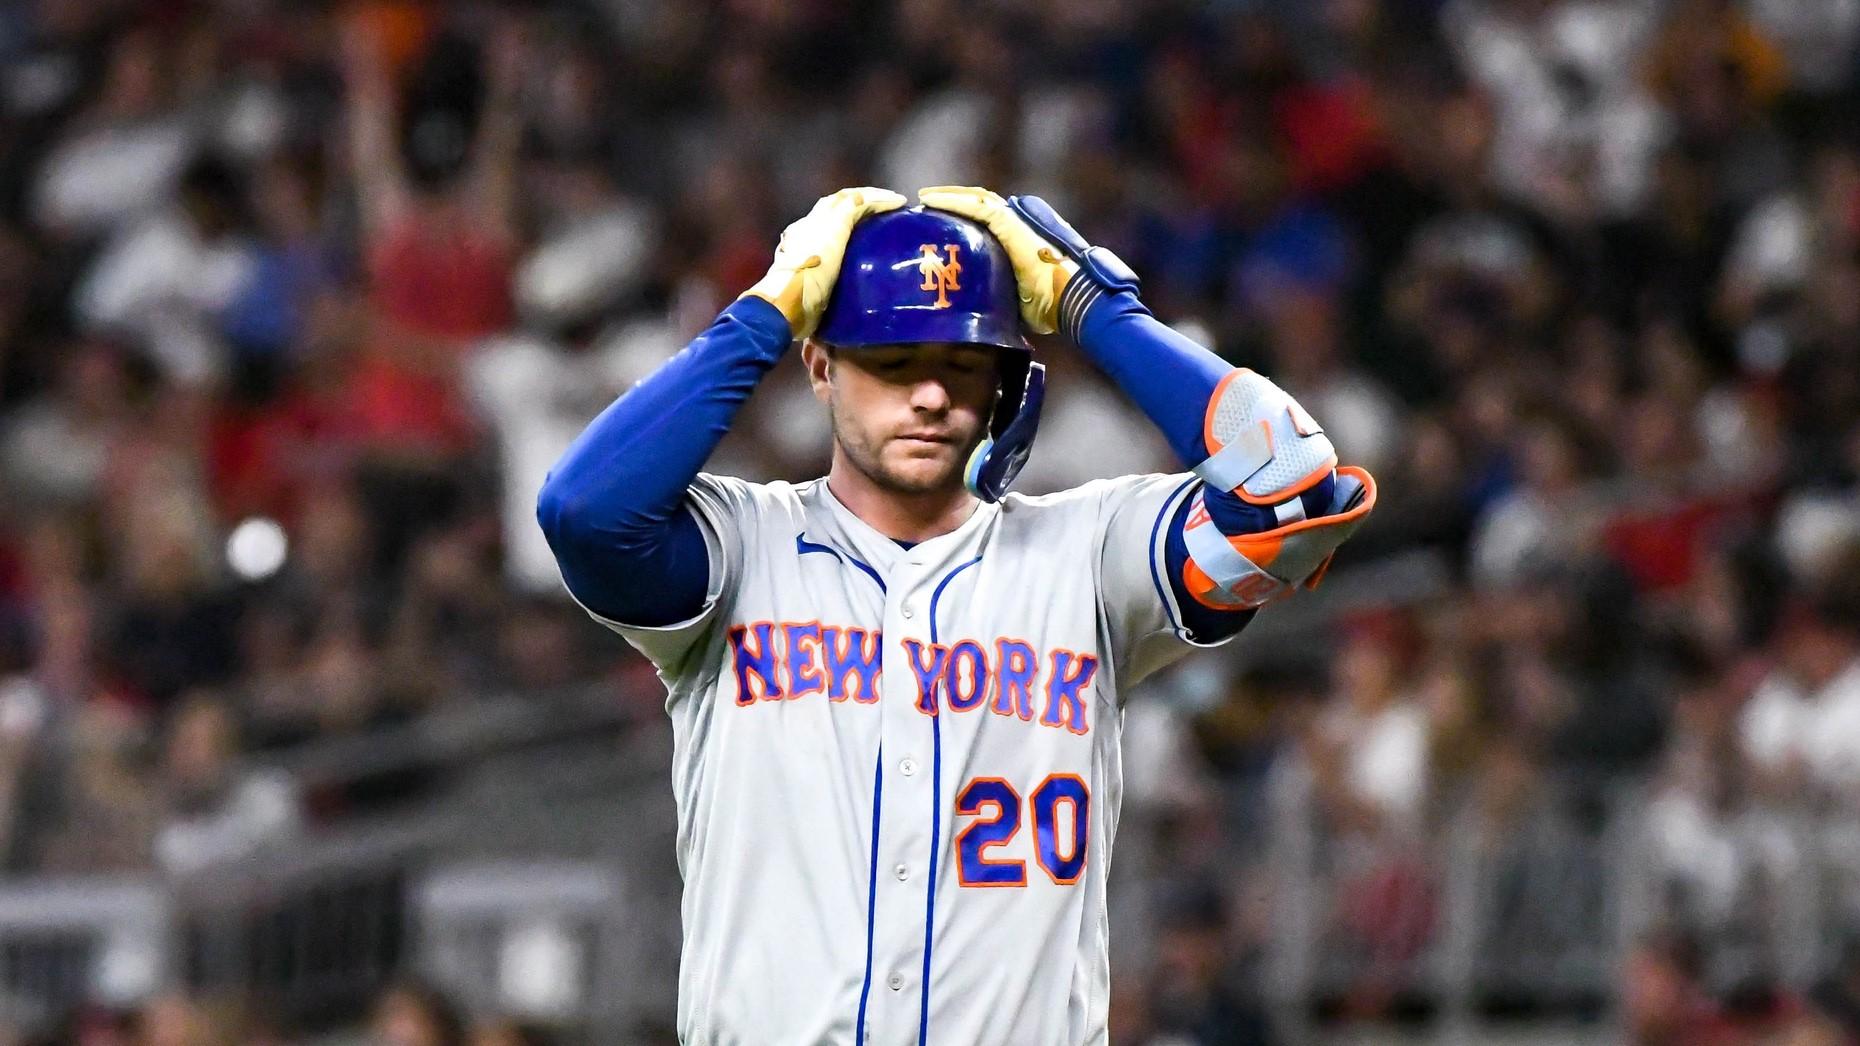 Oct 2, 2022; Cumberland, Georgia, USA; New York Mets first baseman Pete Alonso (20) reacts after hitting a pop fly against the Atlanta Braves in the seventh inning at Truist Park. / Larry Robinson-USA TODAY Sports